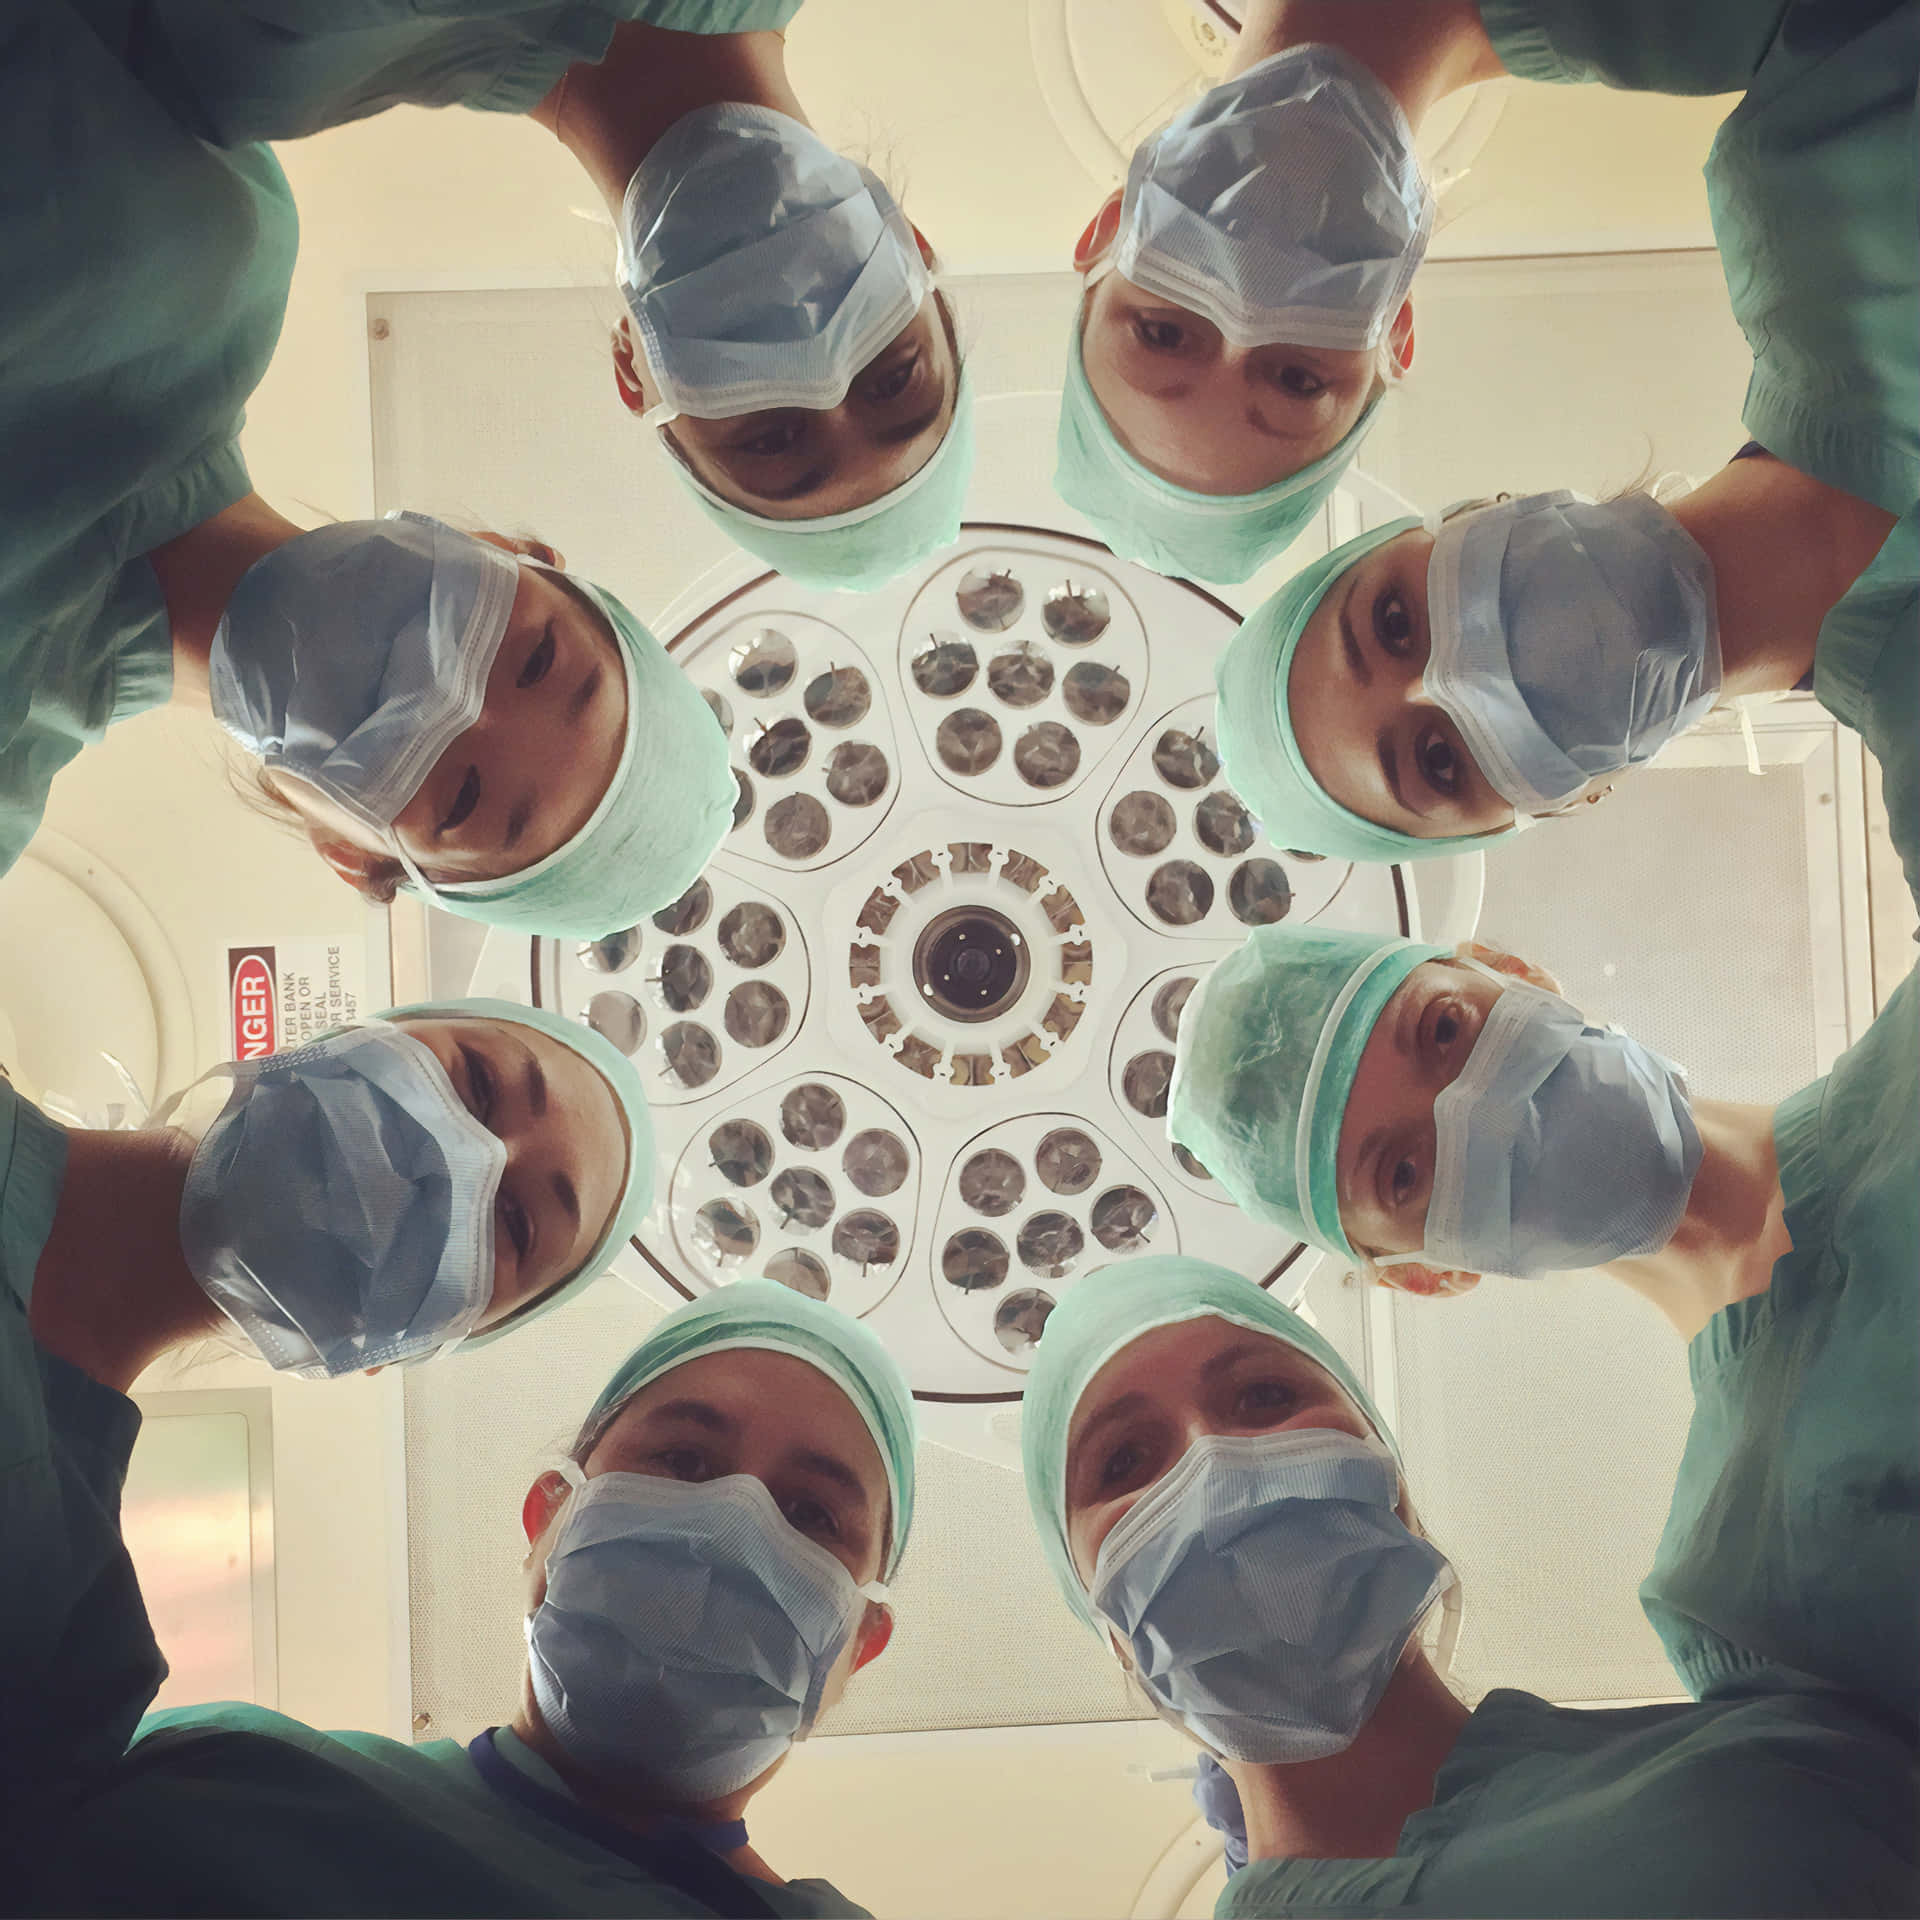 A Group Of Surgeons In A Circle